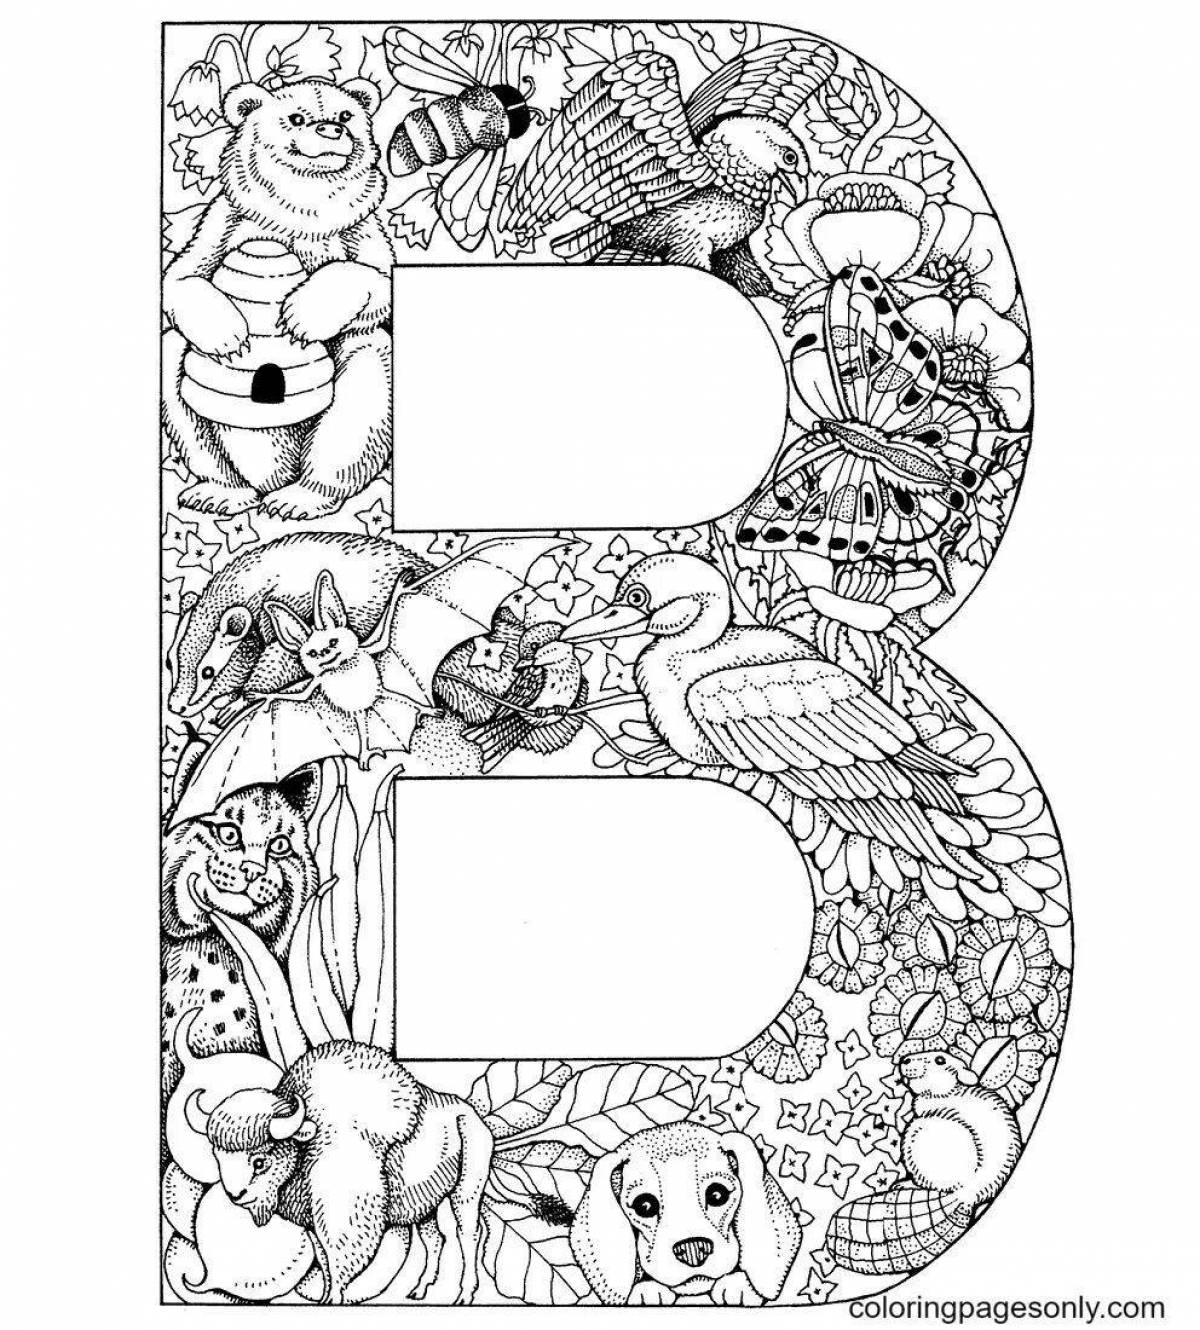 Coloring book soothing anti-stress letters